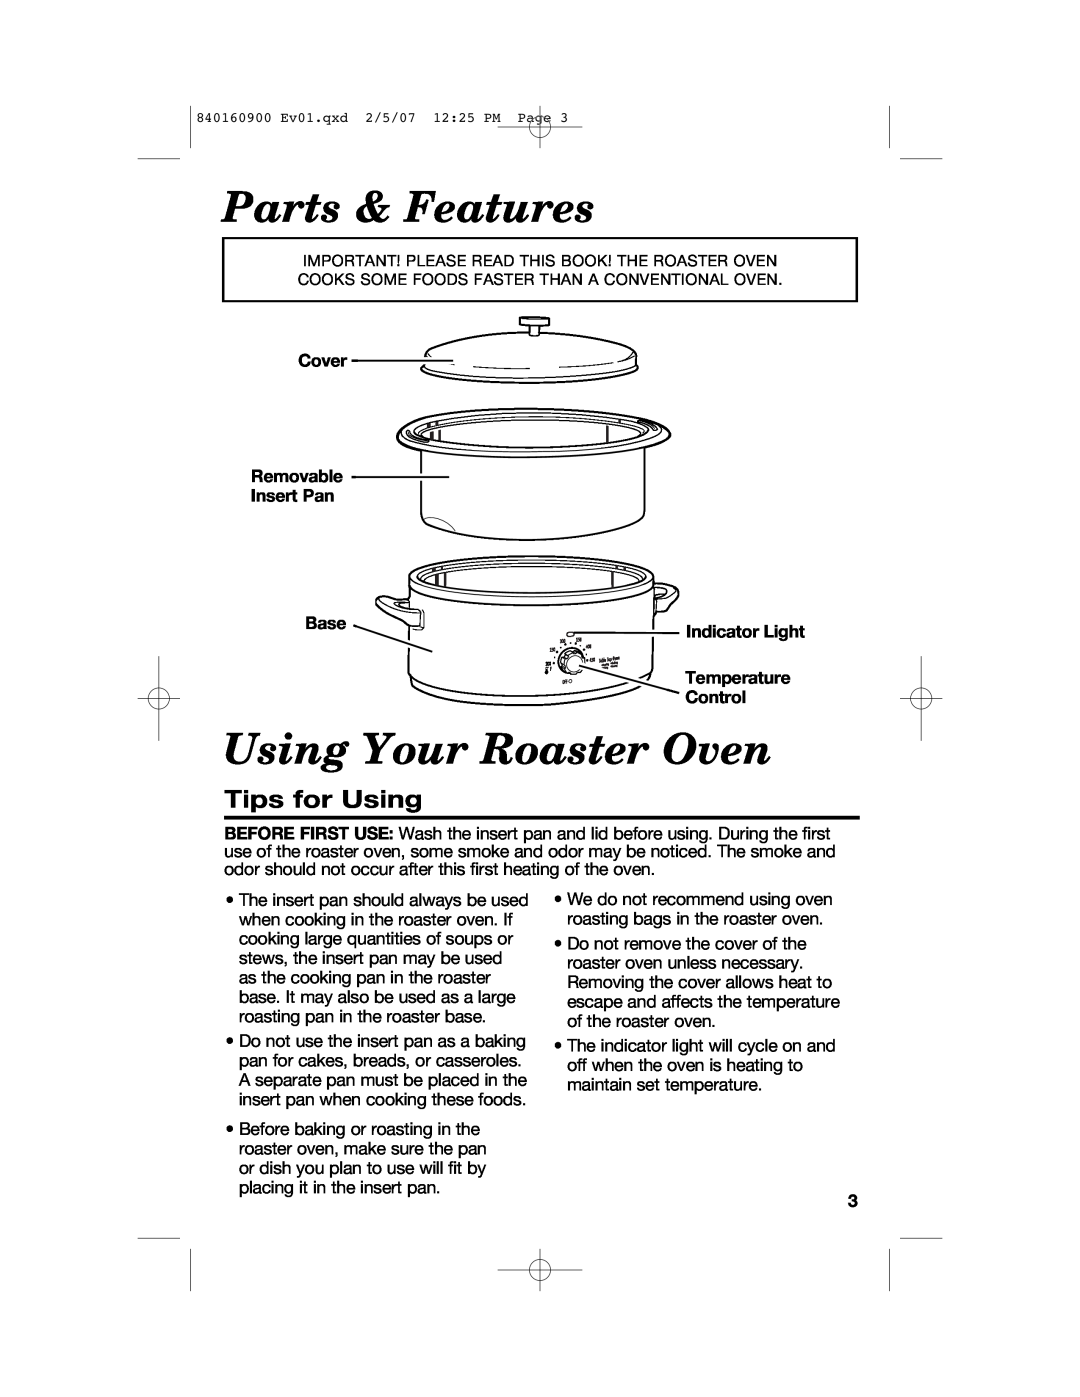 Proctor-Silex 840160900 manual Parts & Features, Using Your Roaster Oven, Tips for Using, Cover Removable Insert Pan, Base 